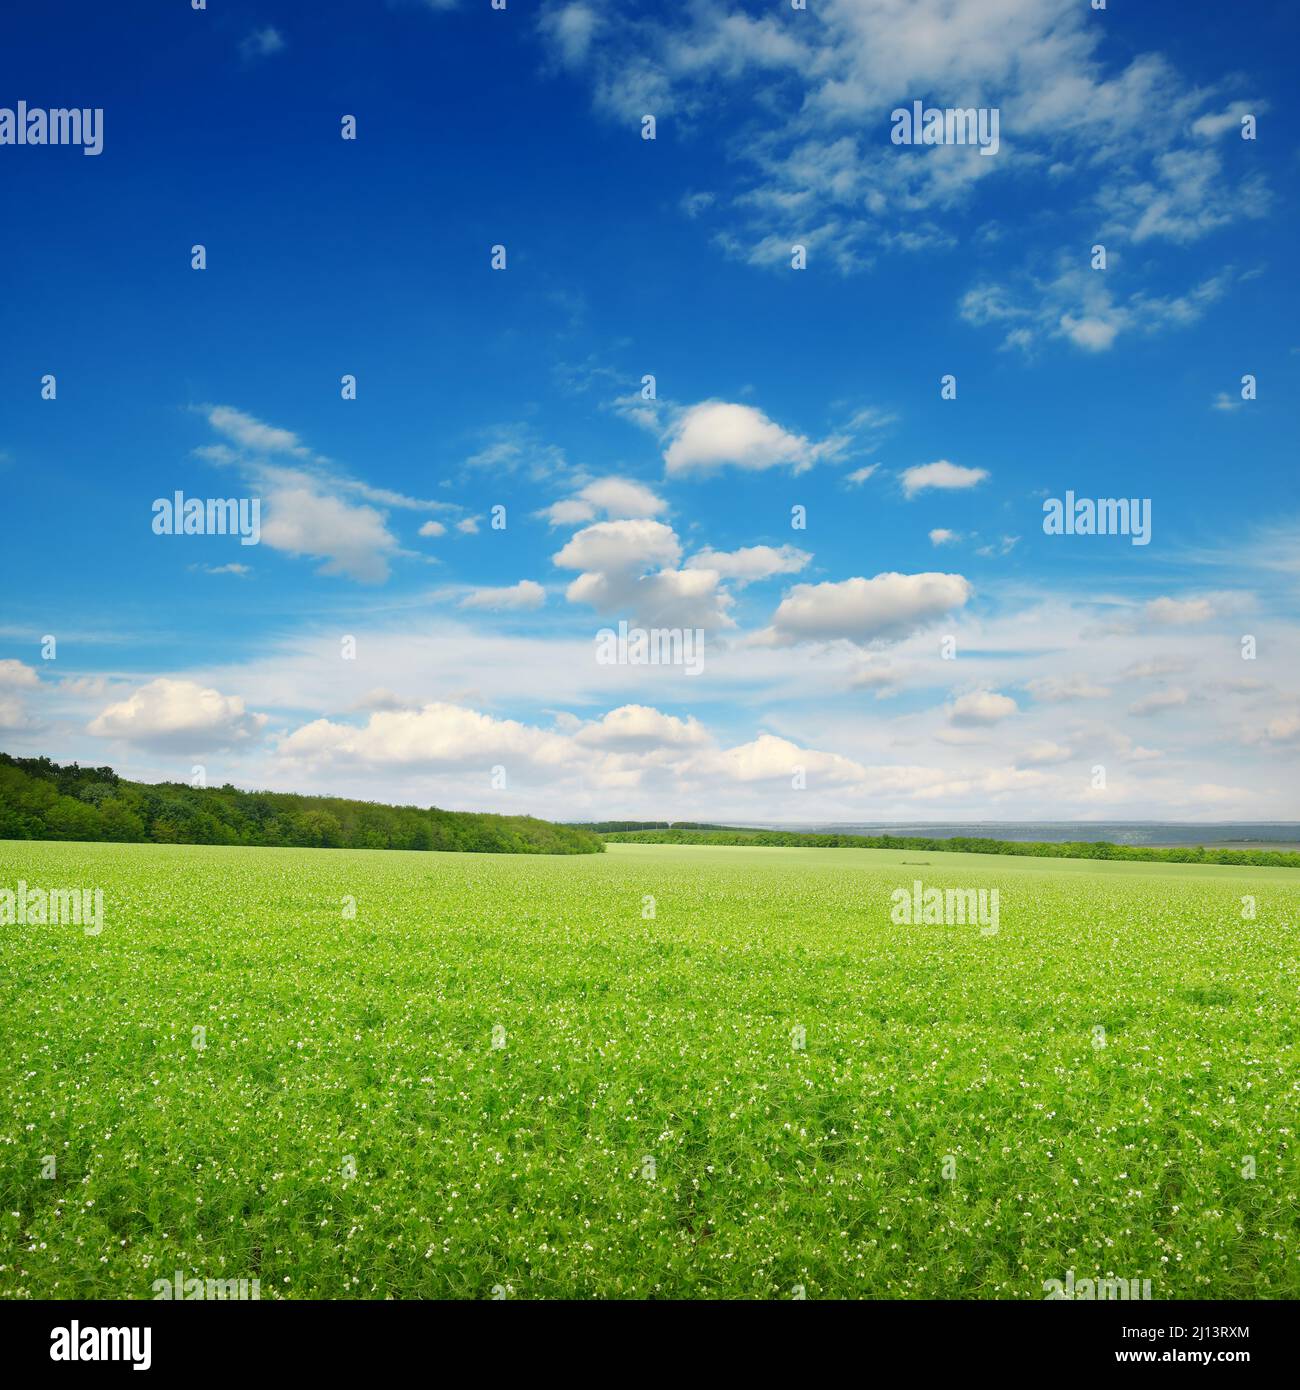 Square landscape with green pea field and blue sky. Stock Photo